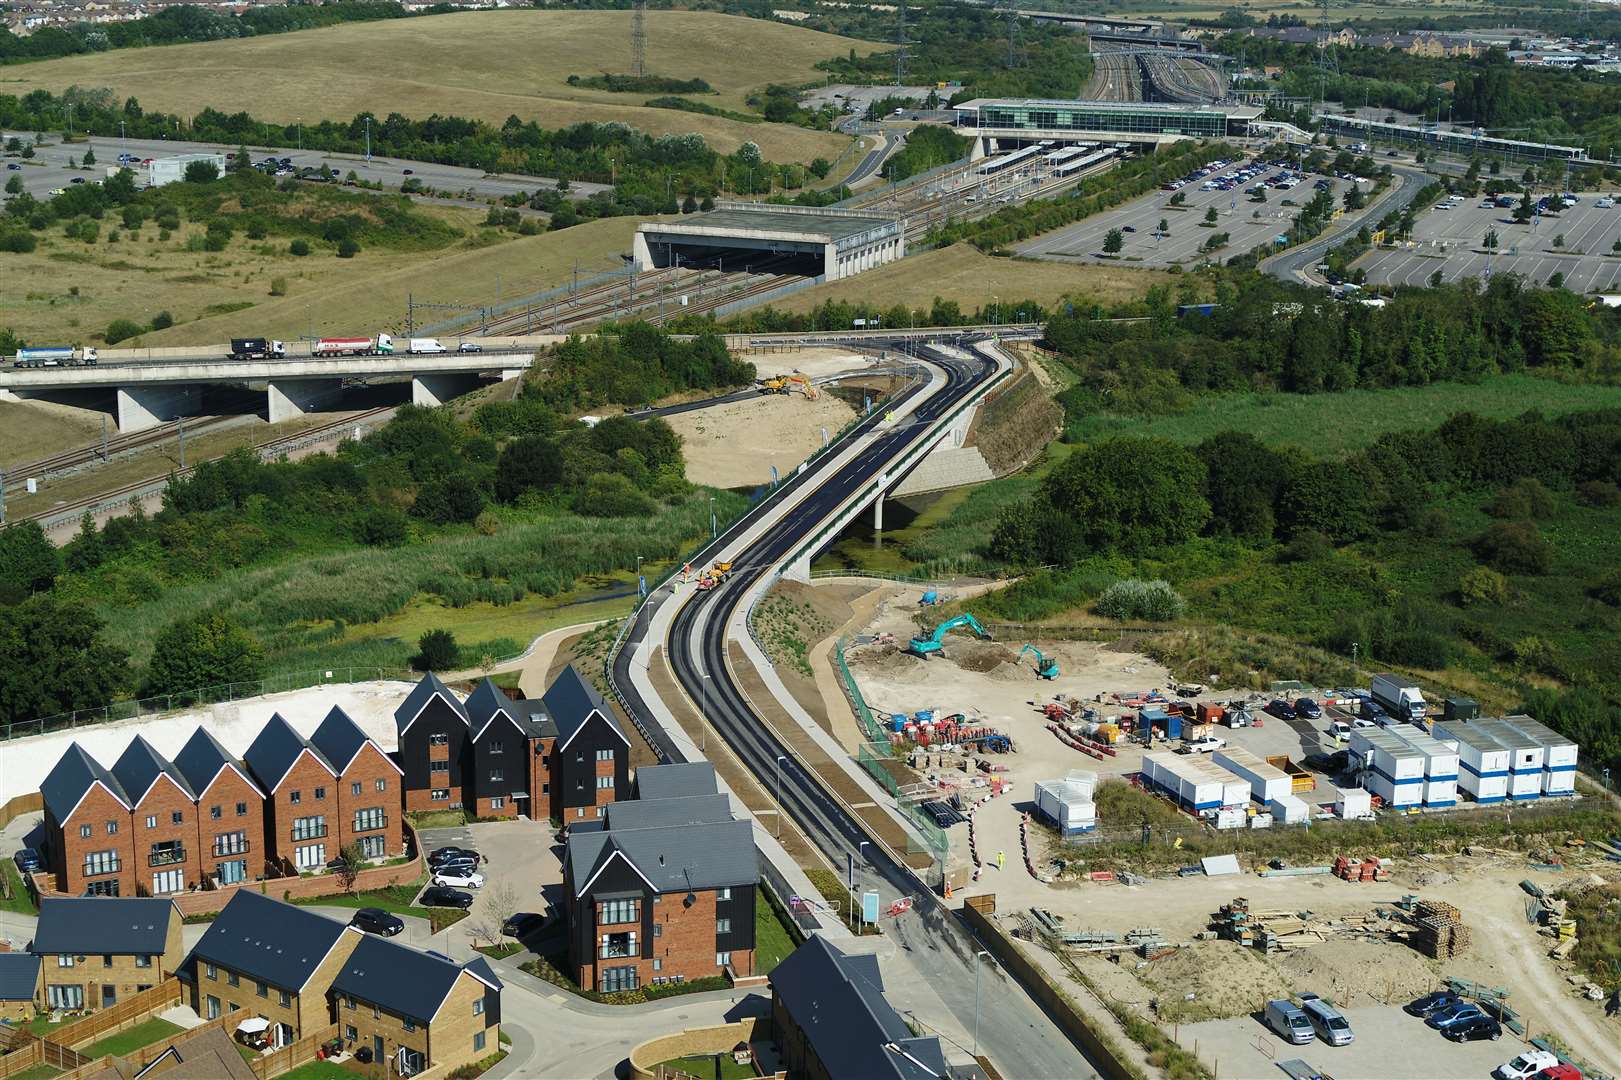 The new Ebbsfleet Garden City Bridge opening has lead to more routes for Arriva